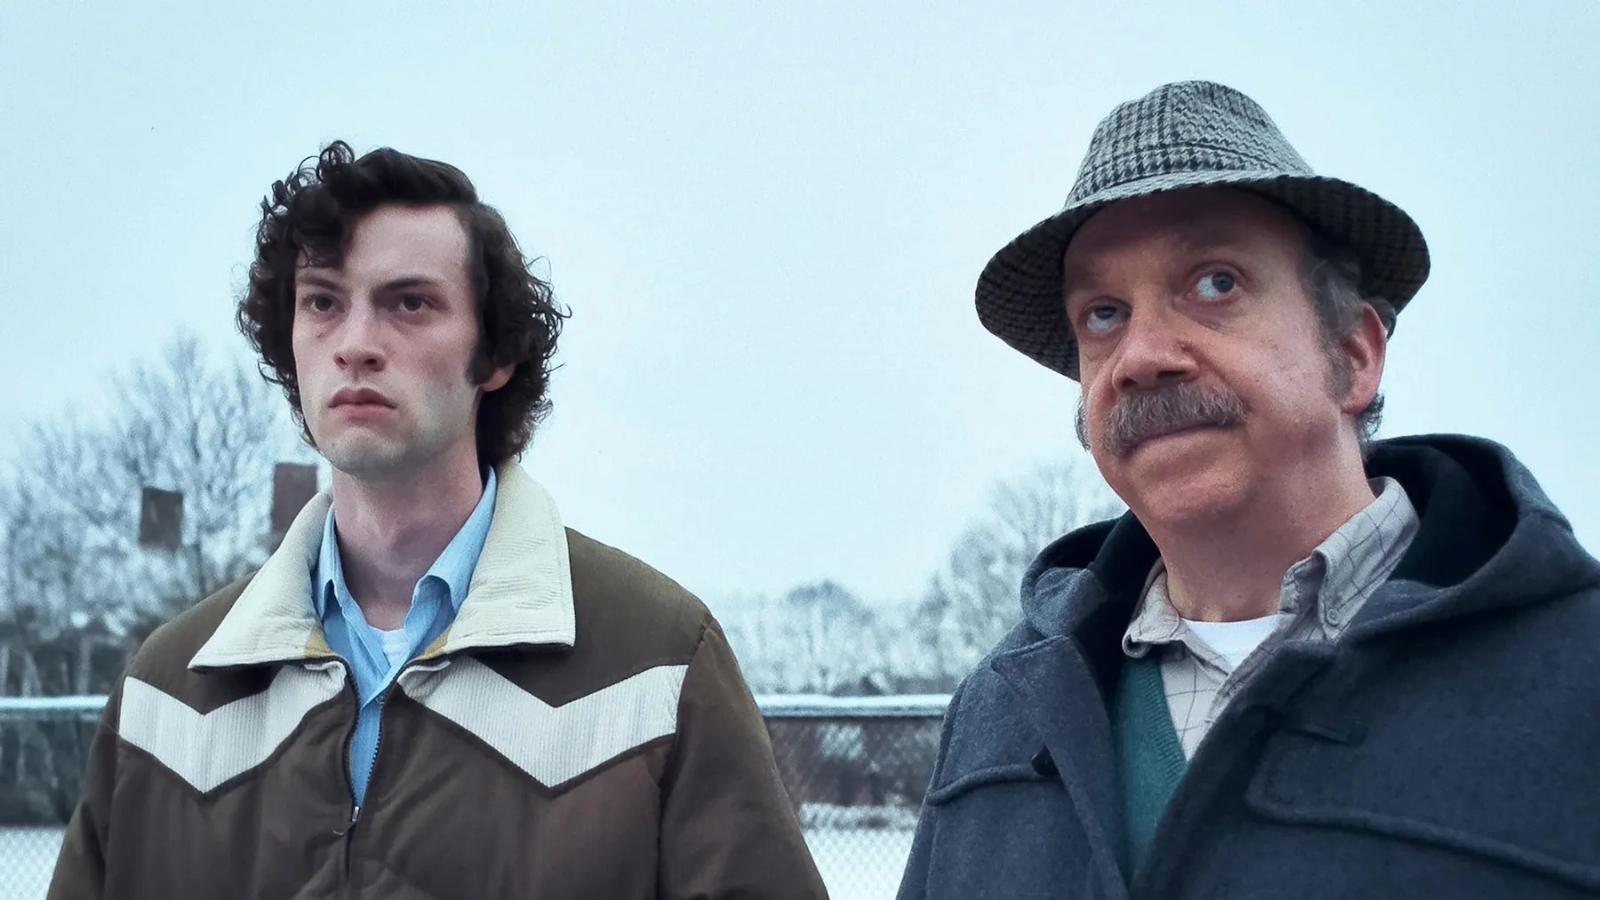 Paul Giamatti and Dominic Sessa in The Holdovers, standing in the snow